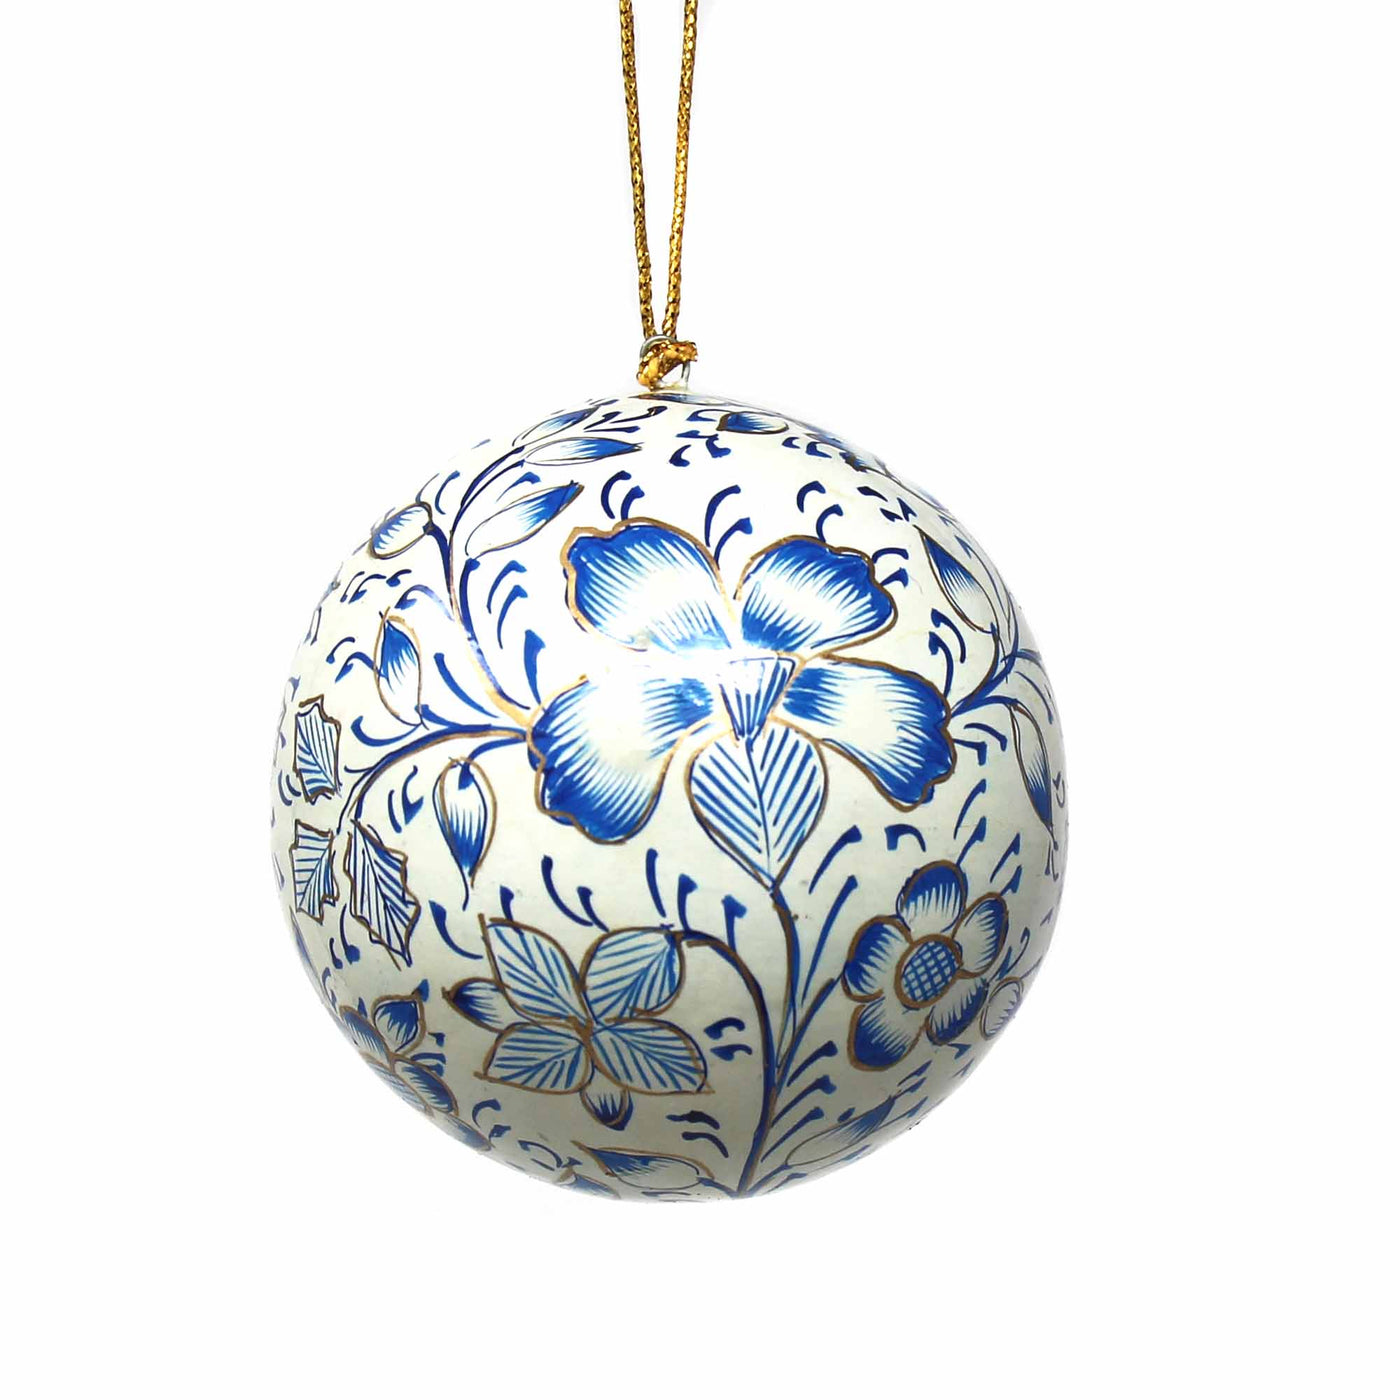 Handpainted Ornaments, Blue Floral - Pack of 3 - Yvonne’s 100th Wish Inc